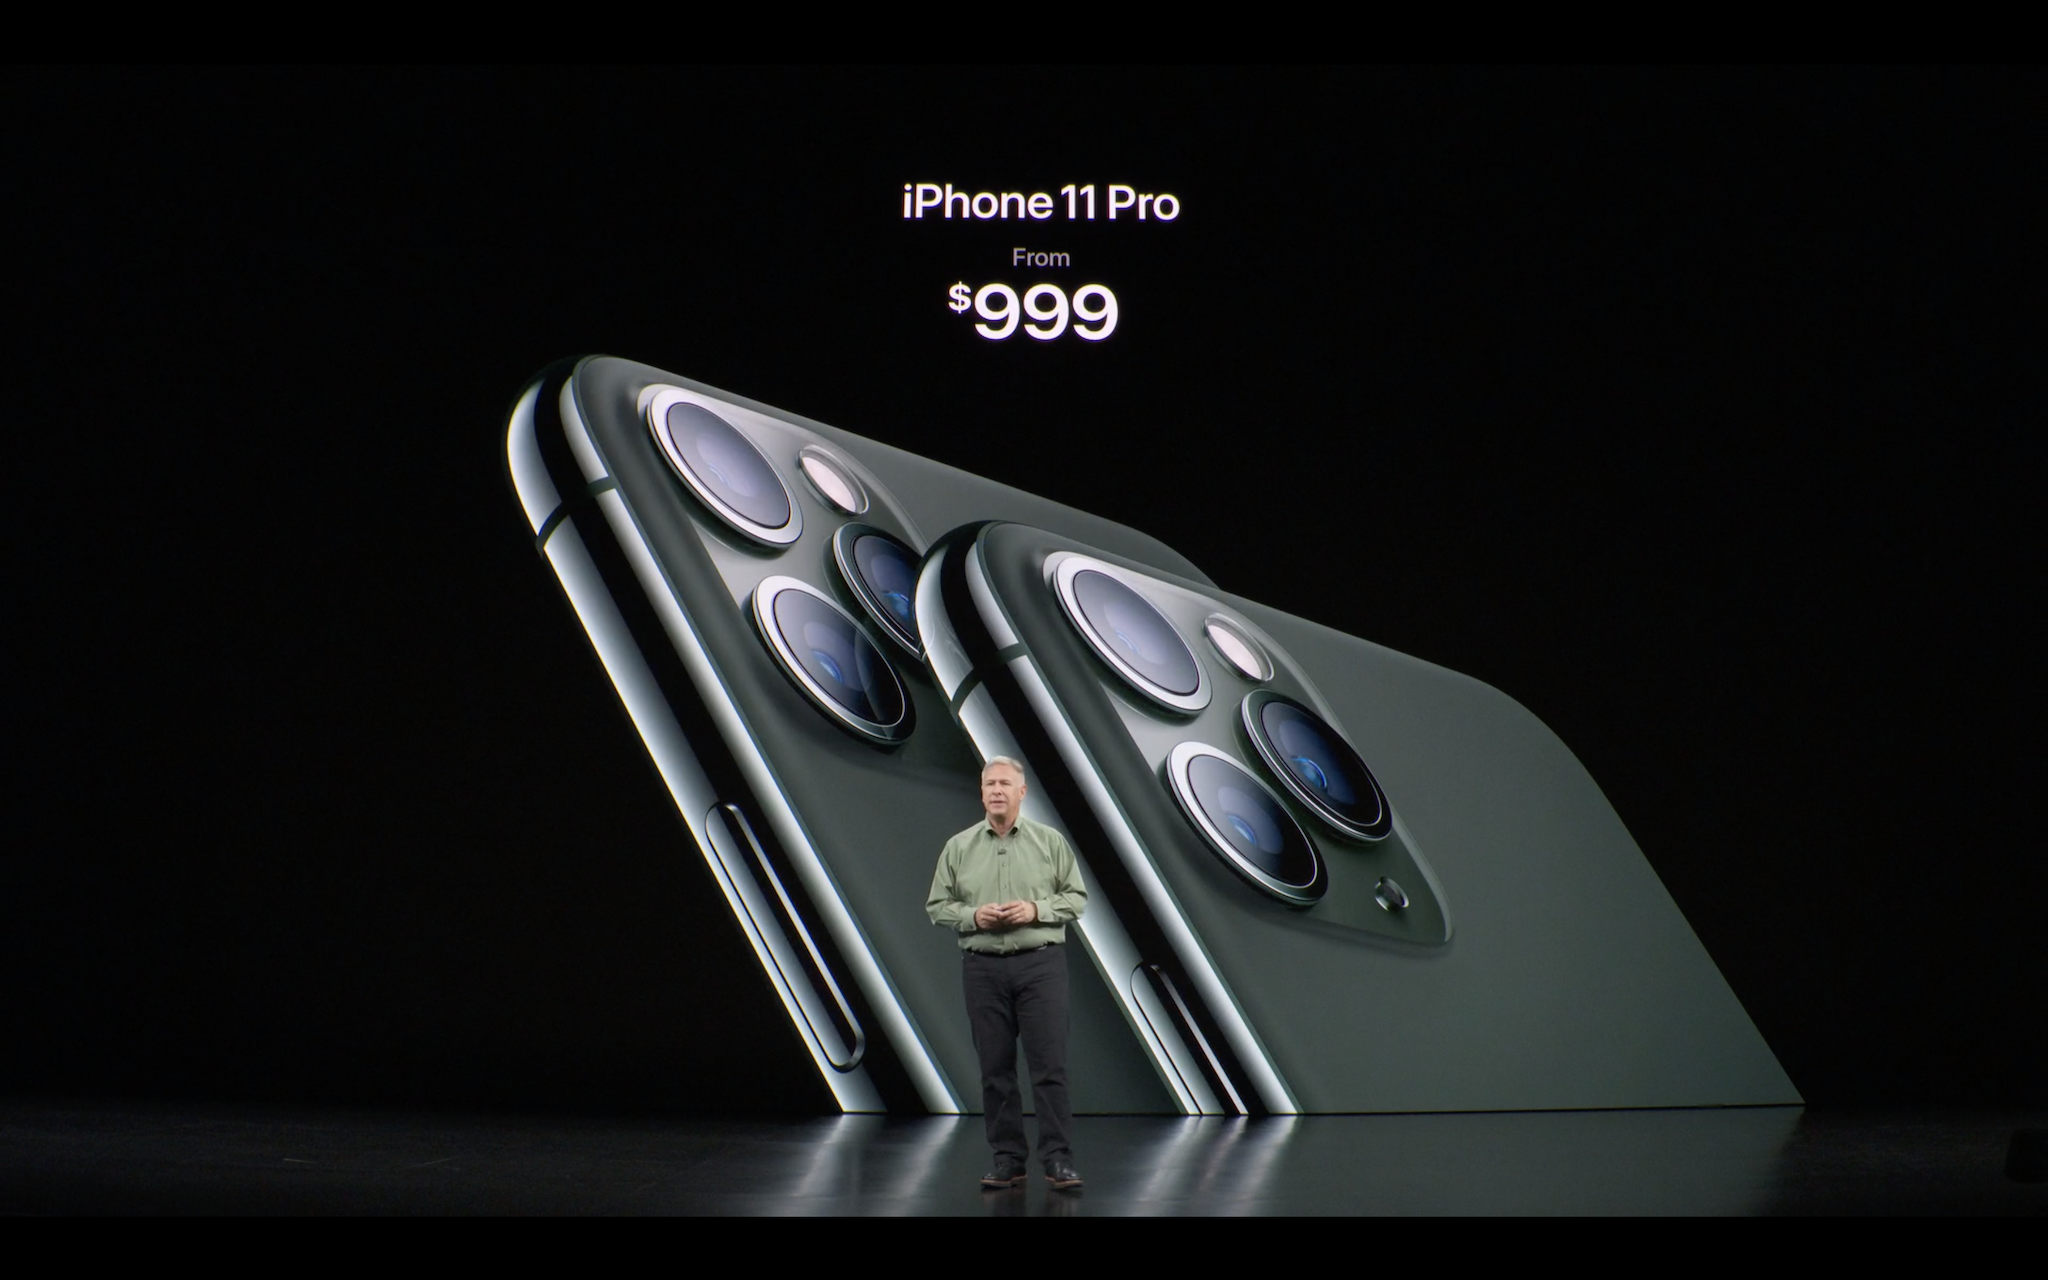 iphone11pro_price4.png